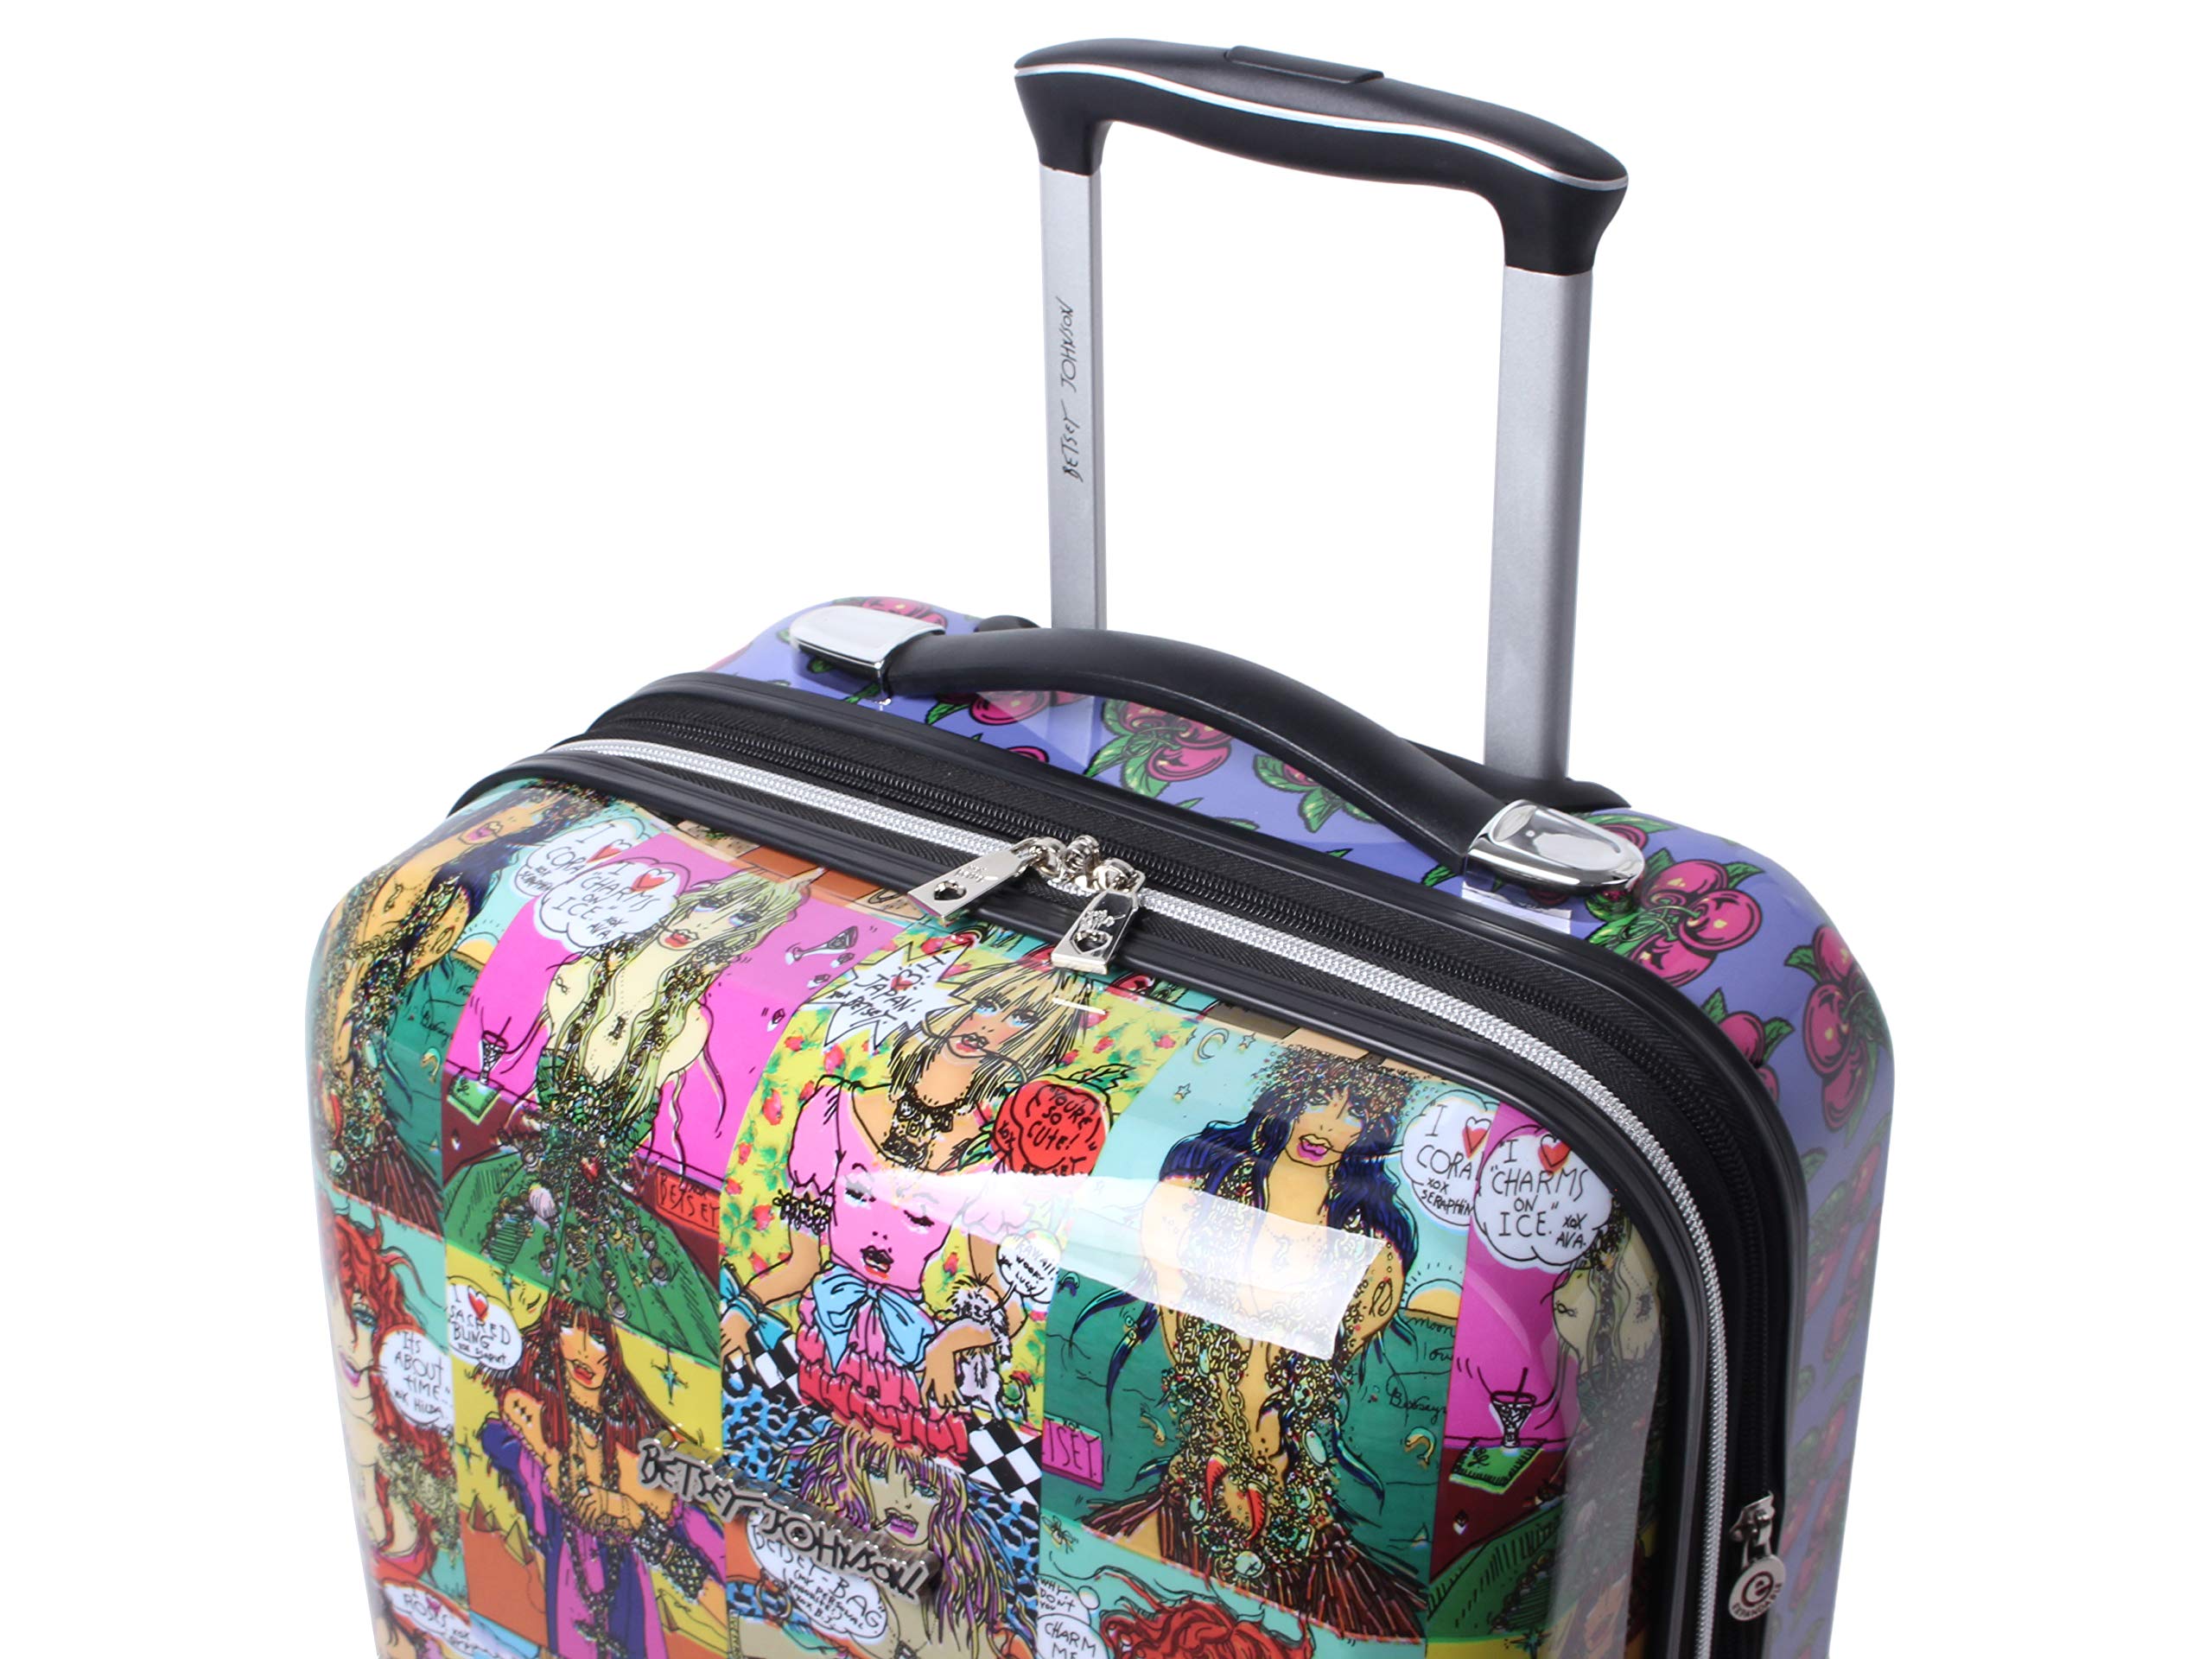 Betsey Johnson Designer 20 Inch Carry On - Expandable (ABS + PC) Hardside Luggage - Lightweight Durable Suitcase With 8-Rolling Spinner Wheels for Women (Girls Print)